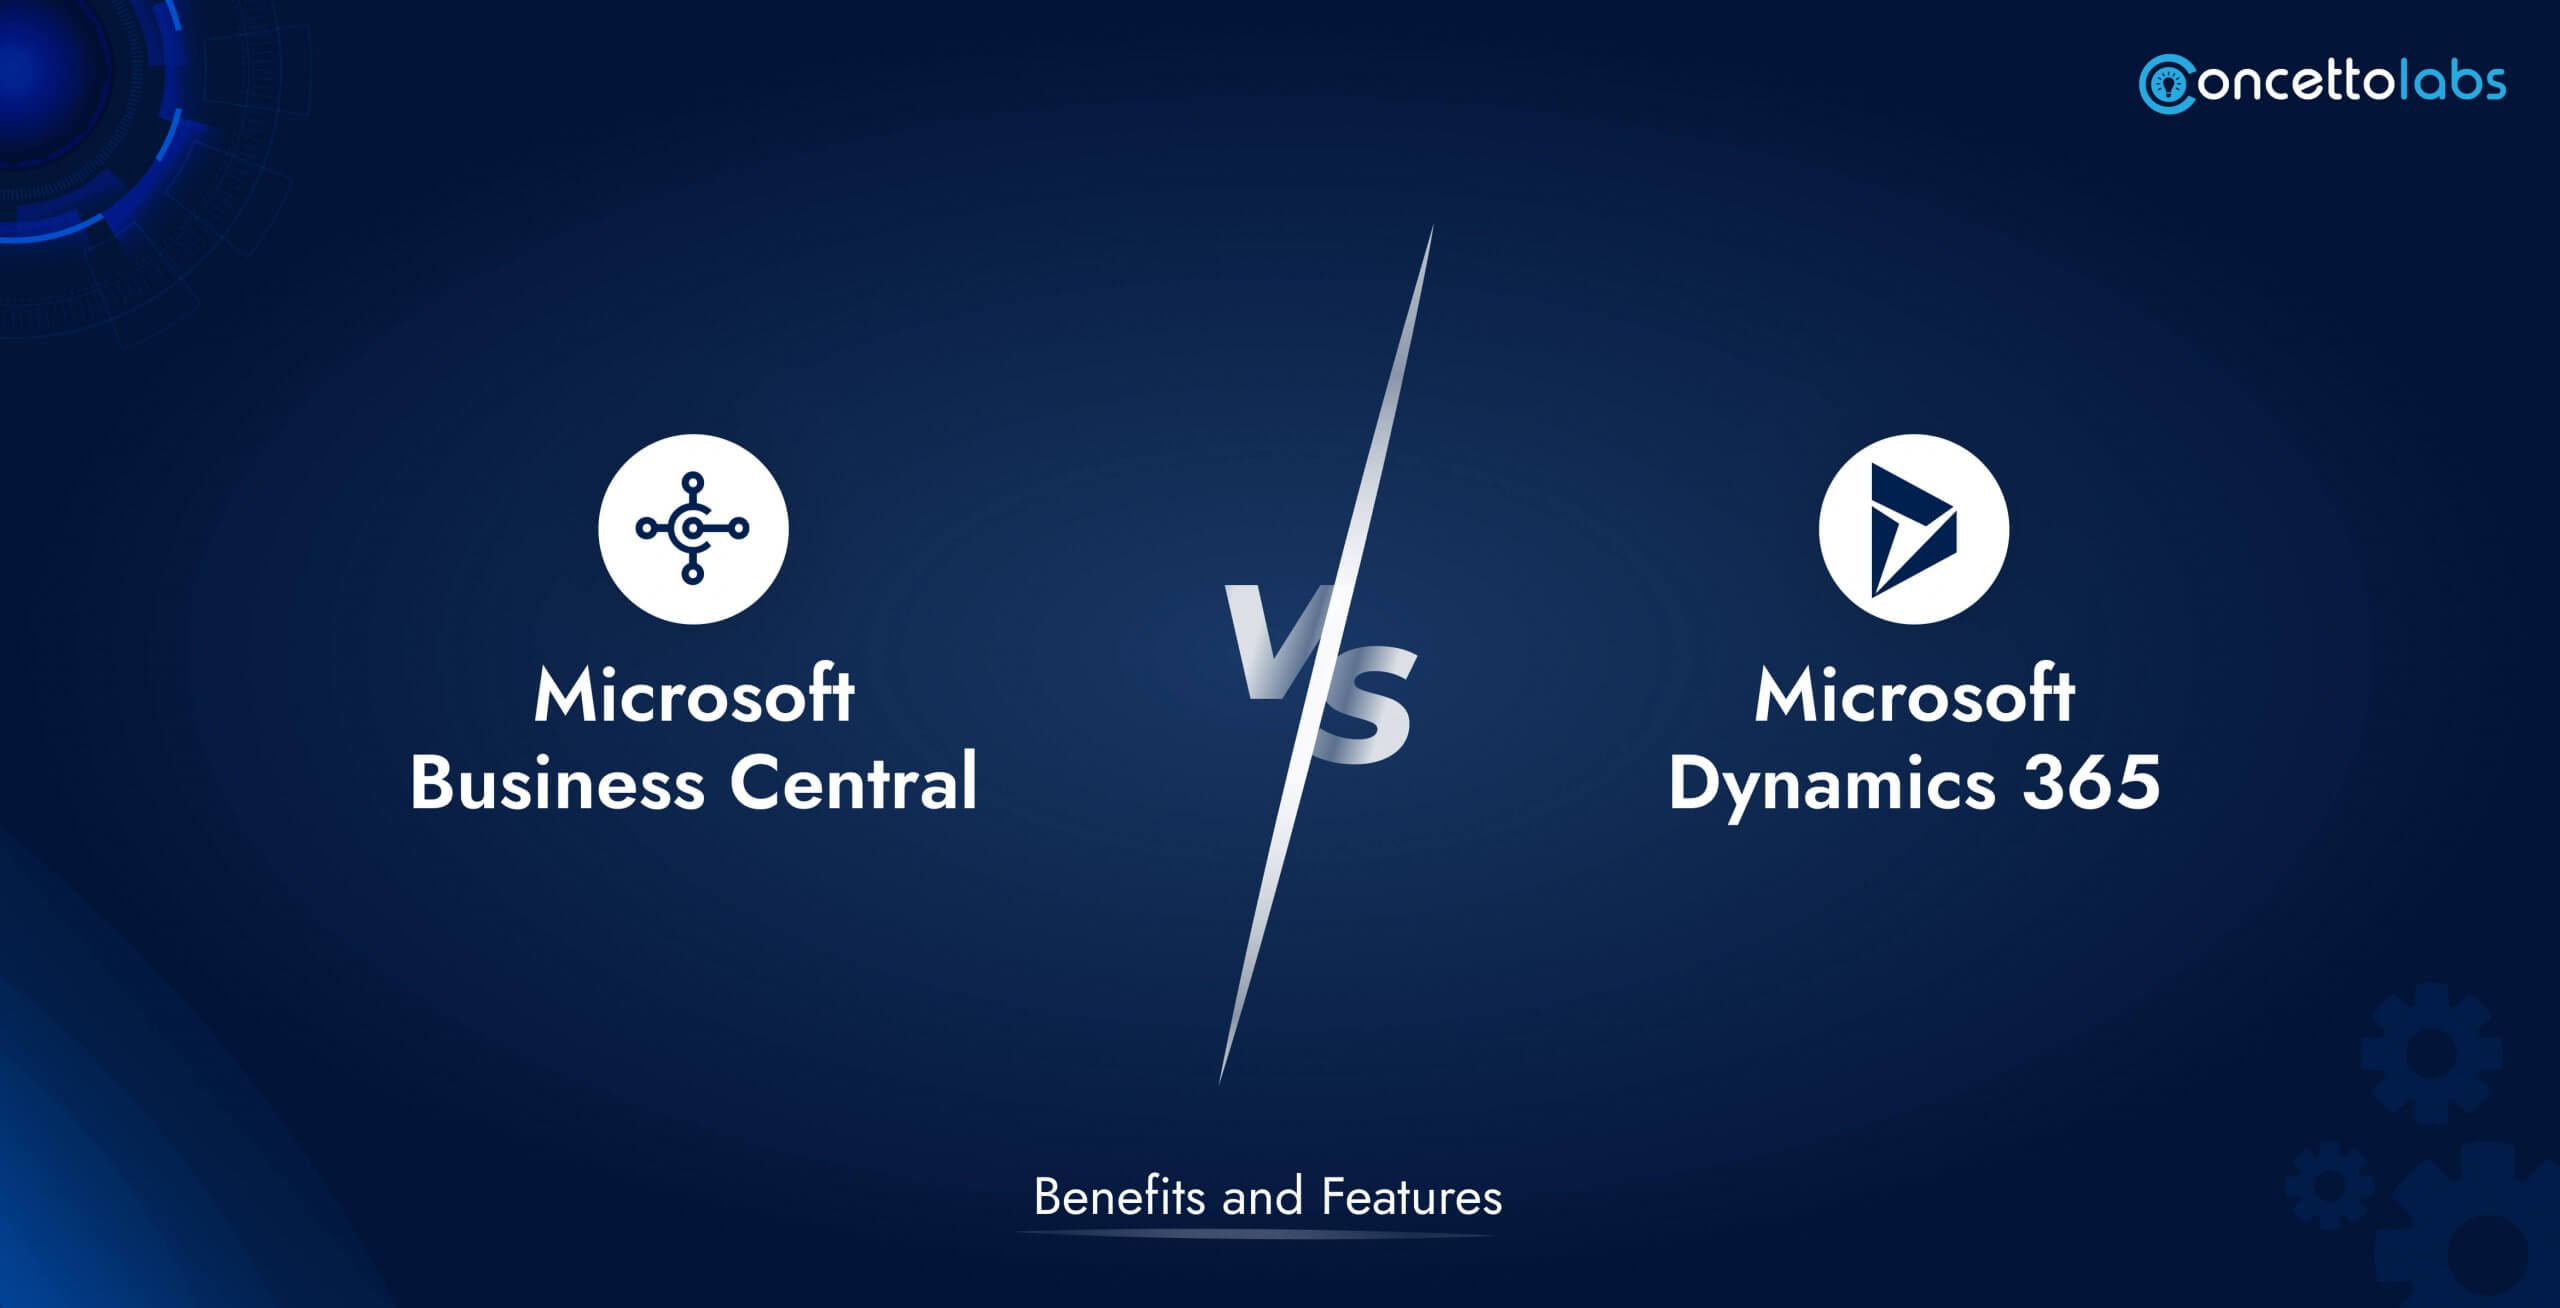 What is Microsoft Business Central vs Dynamics 365 - Benefits and Features?